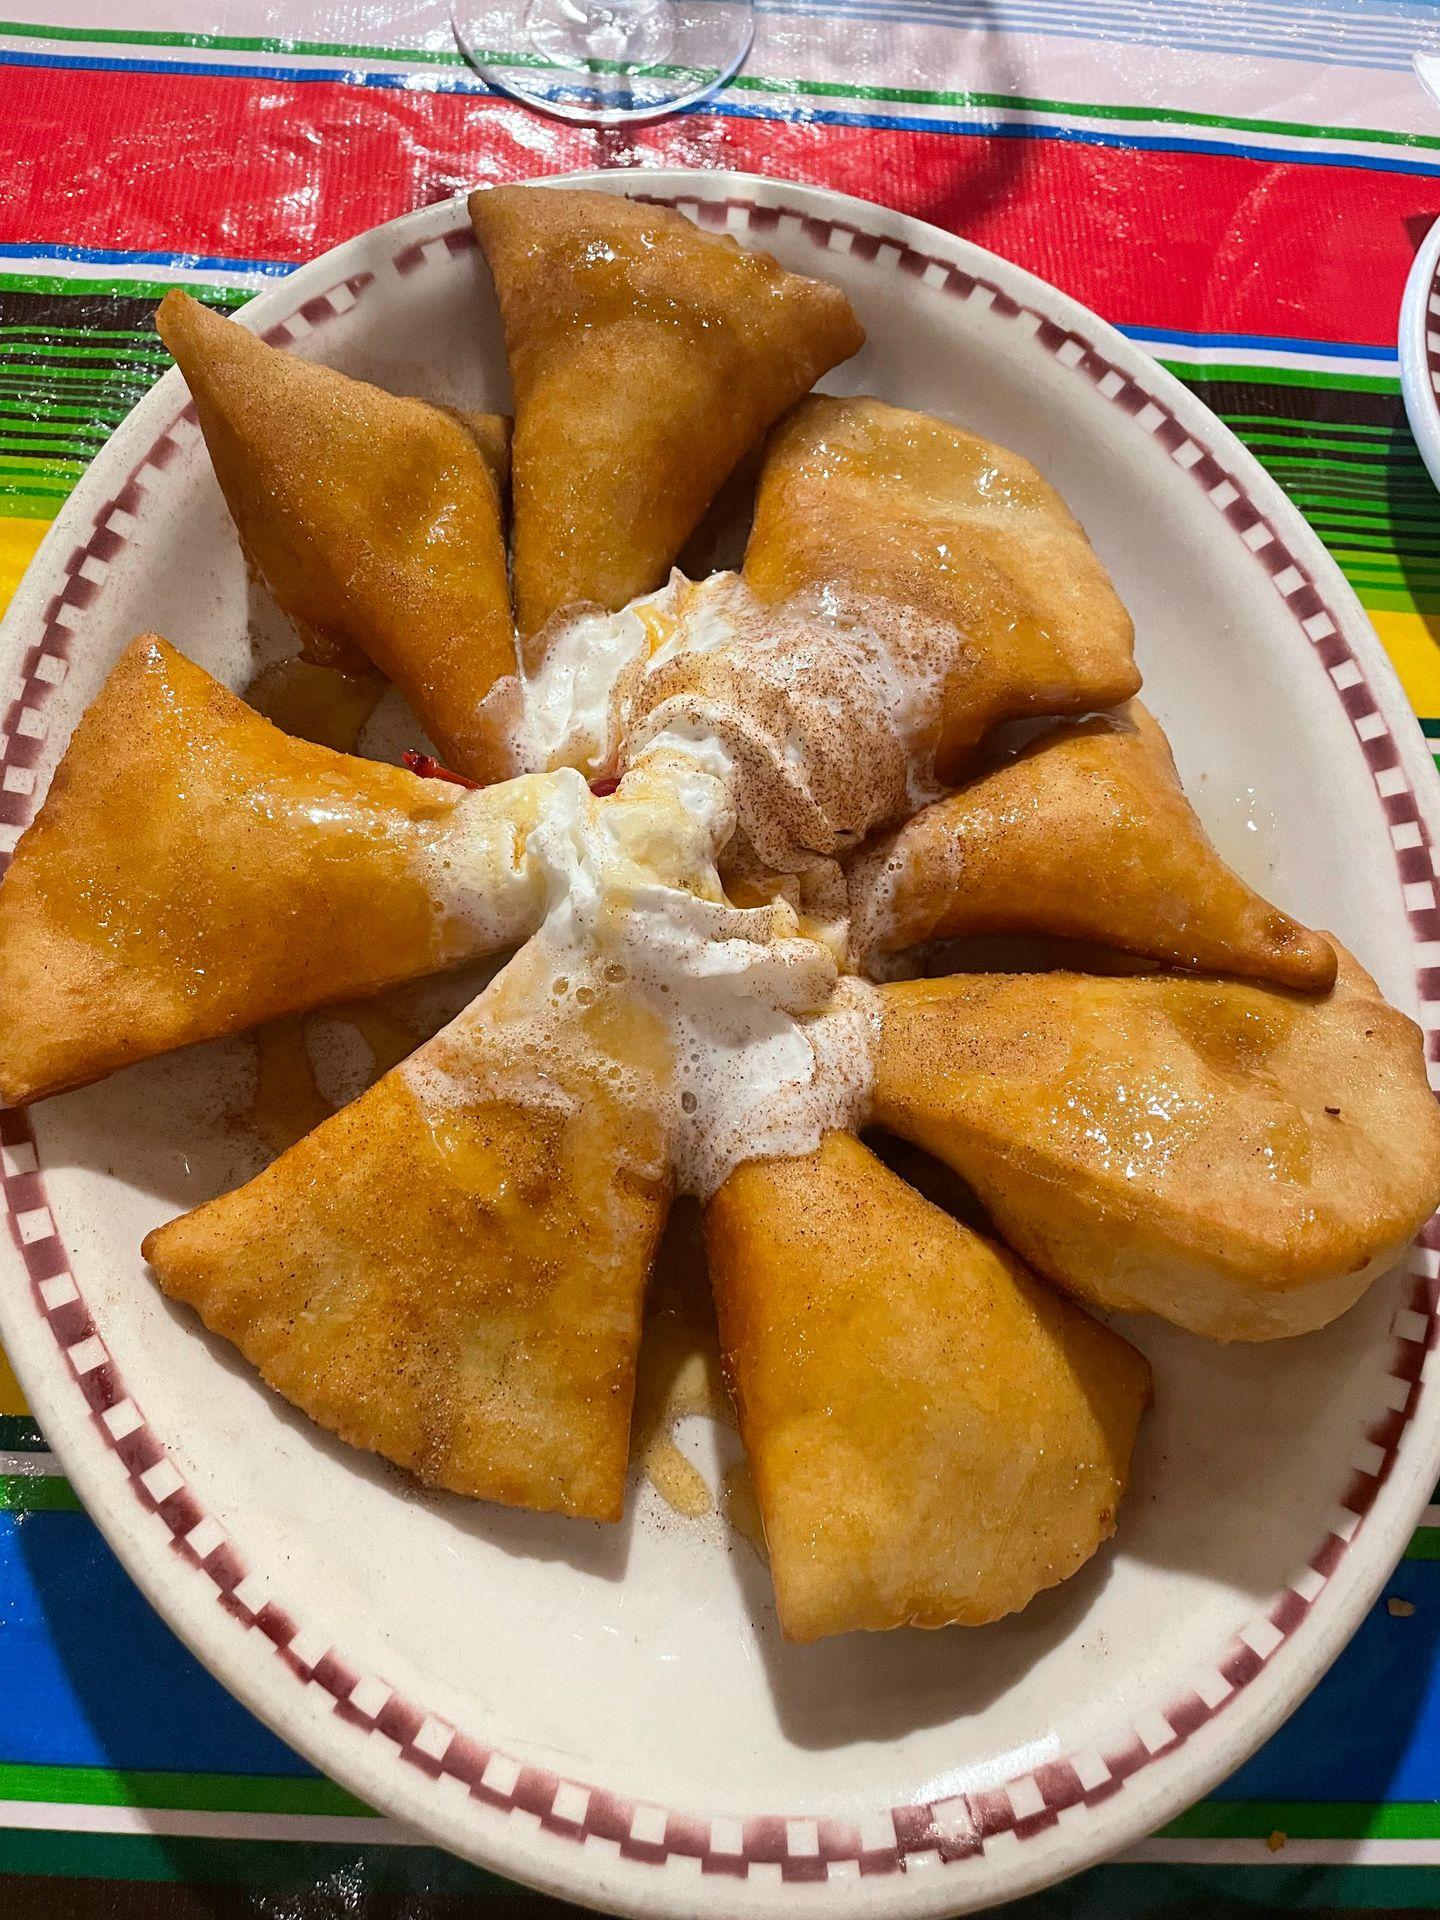 A plate of sopaipillas from Red Iguana